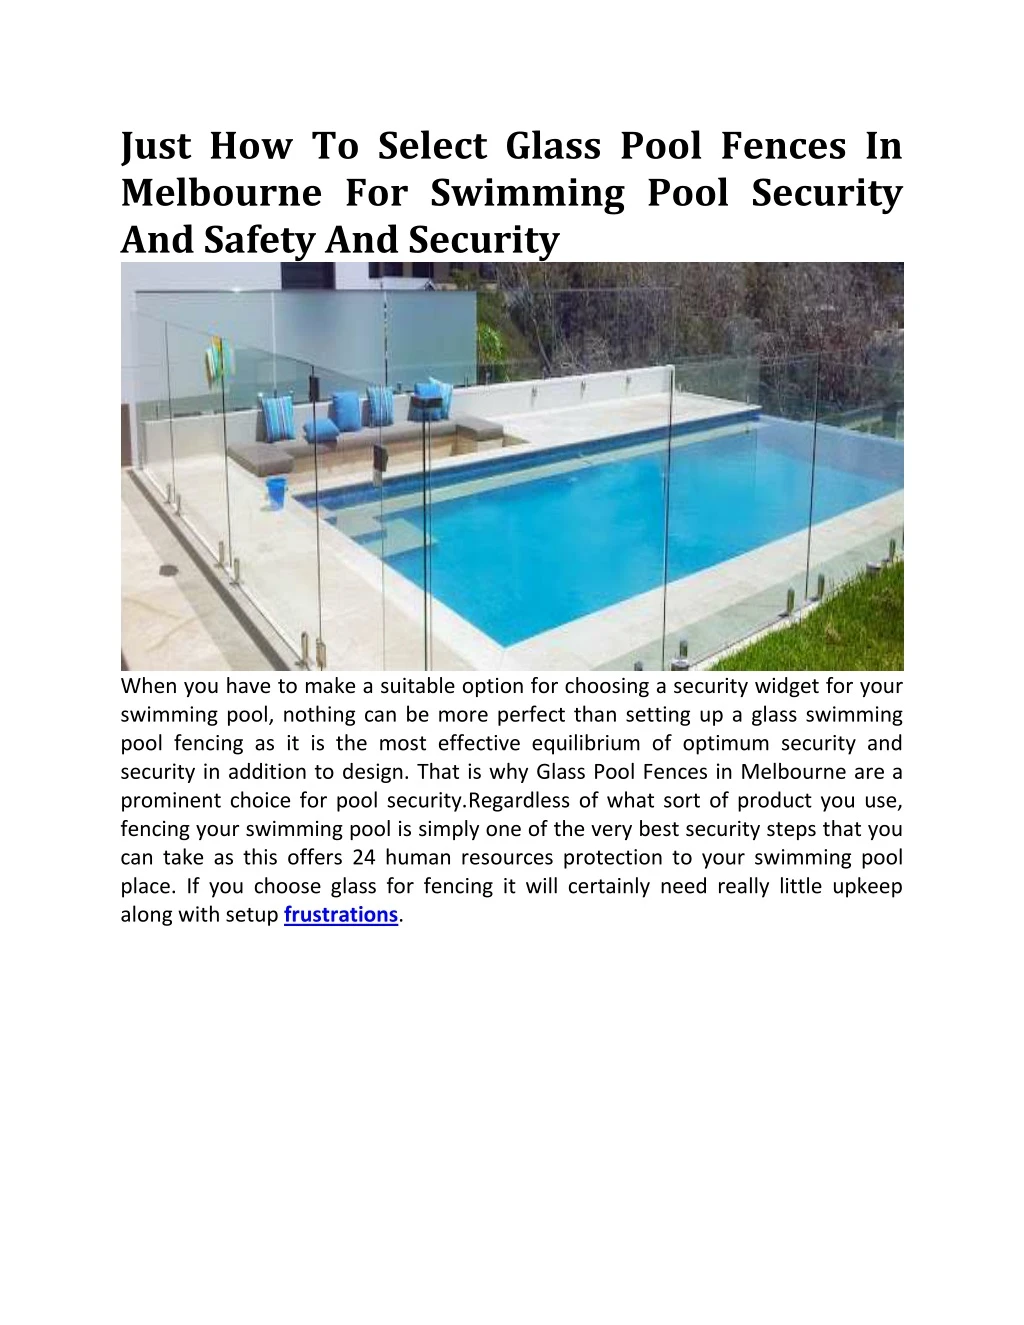 just how to select glass pool fences in melbourne n.